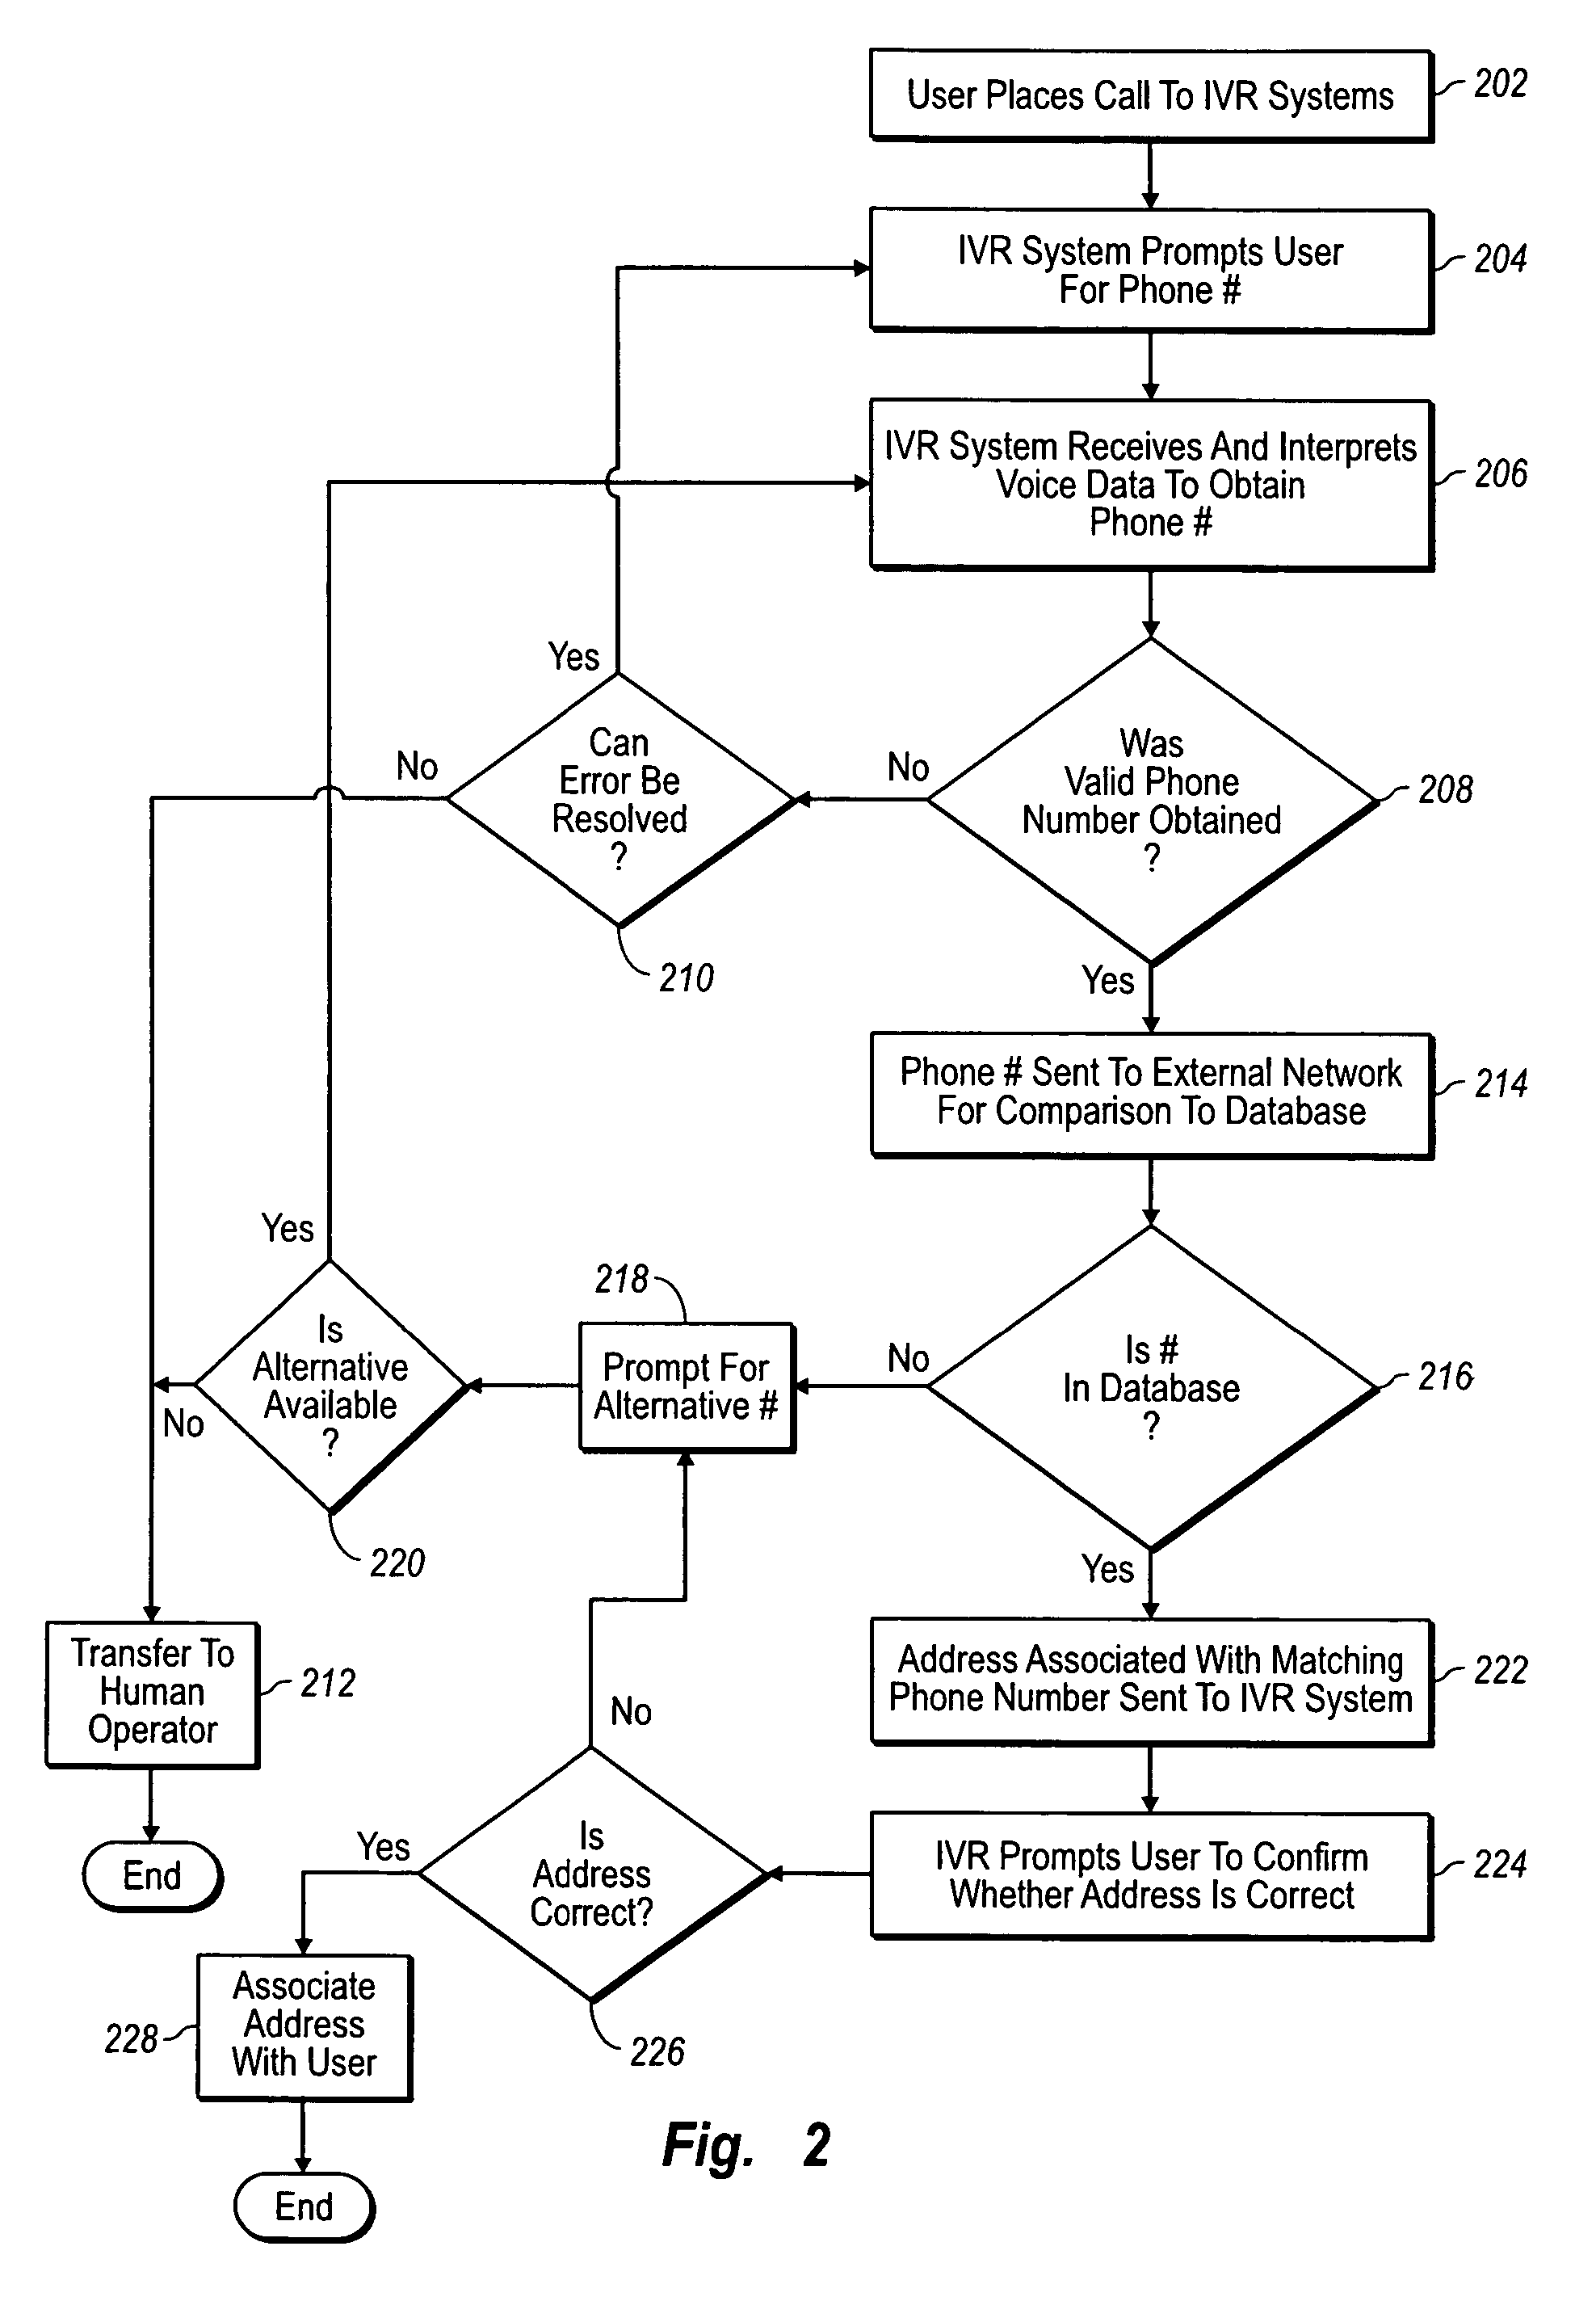 Methods for obtaining complex data in an interactive voice response system